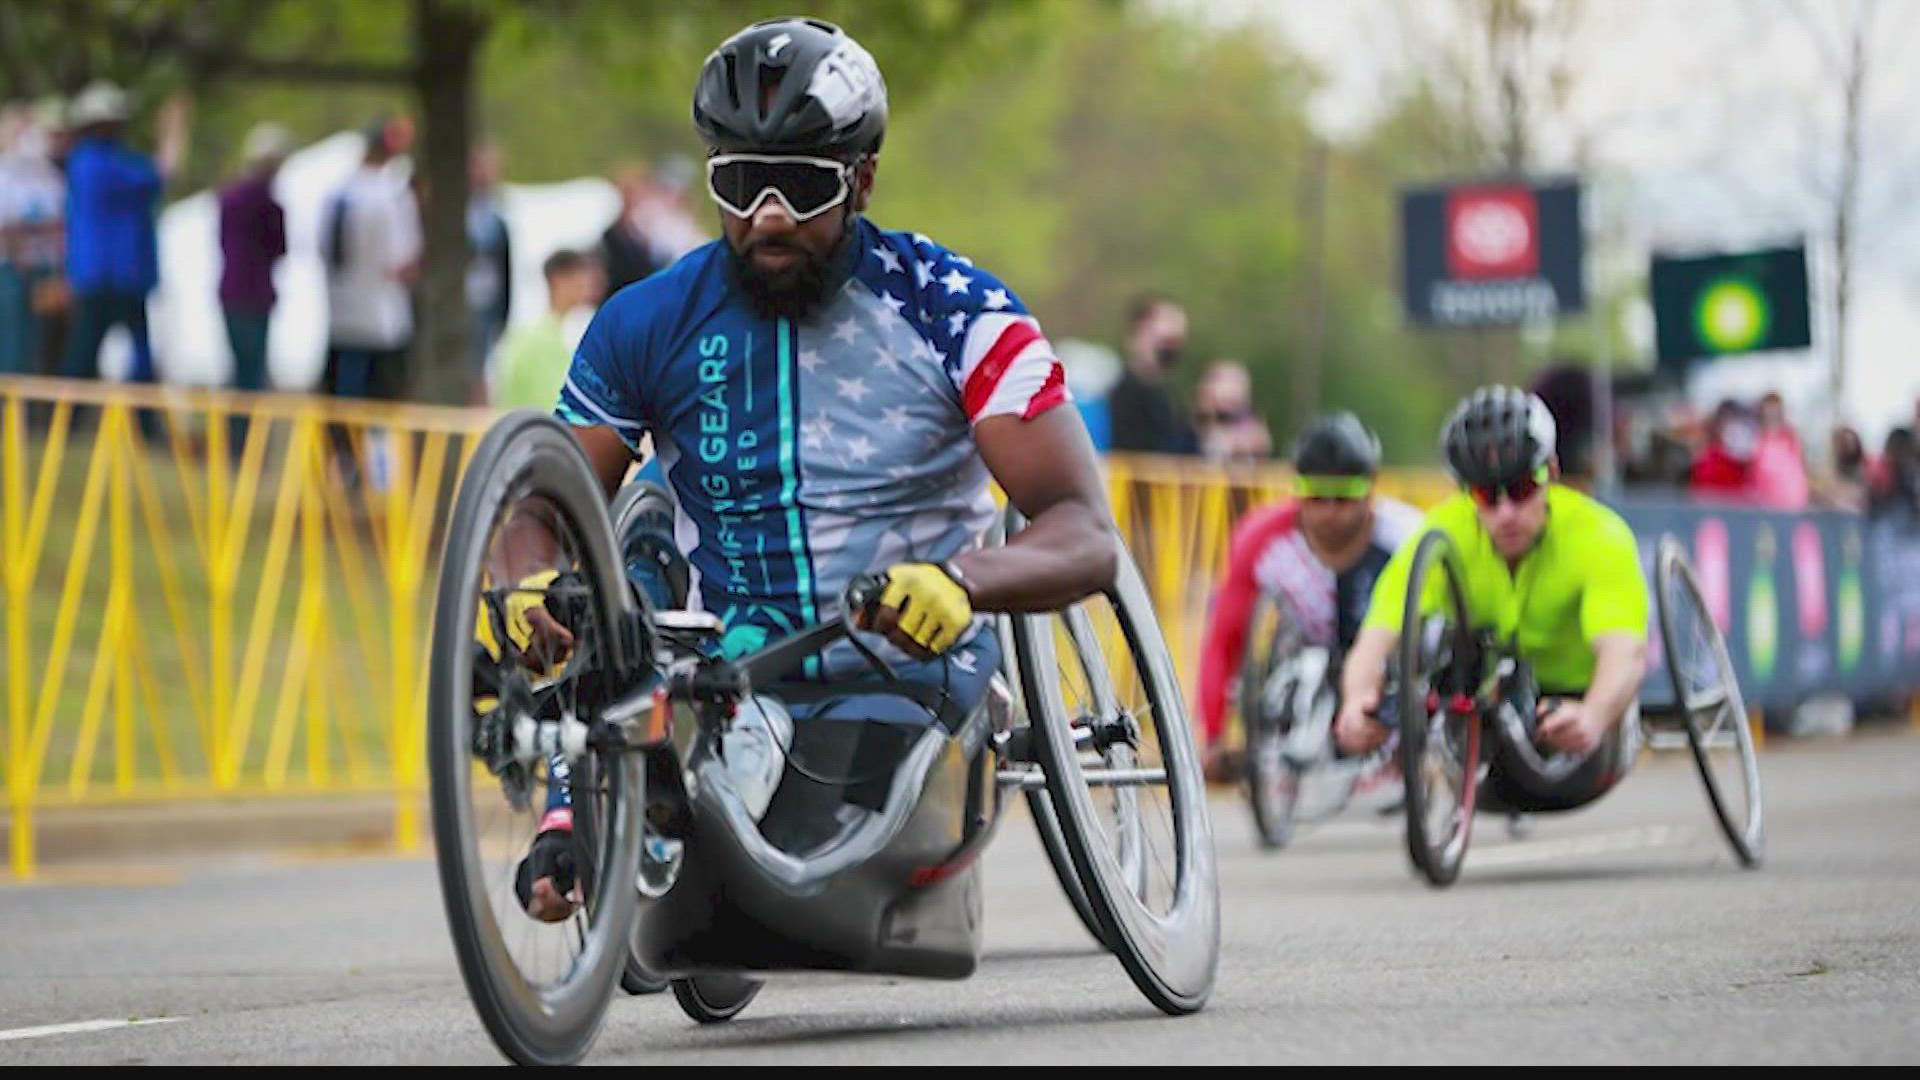 The Paralympic Open's first stop is in Huntsville, AL.